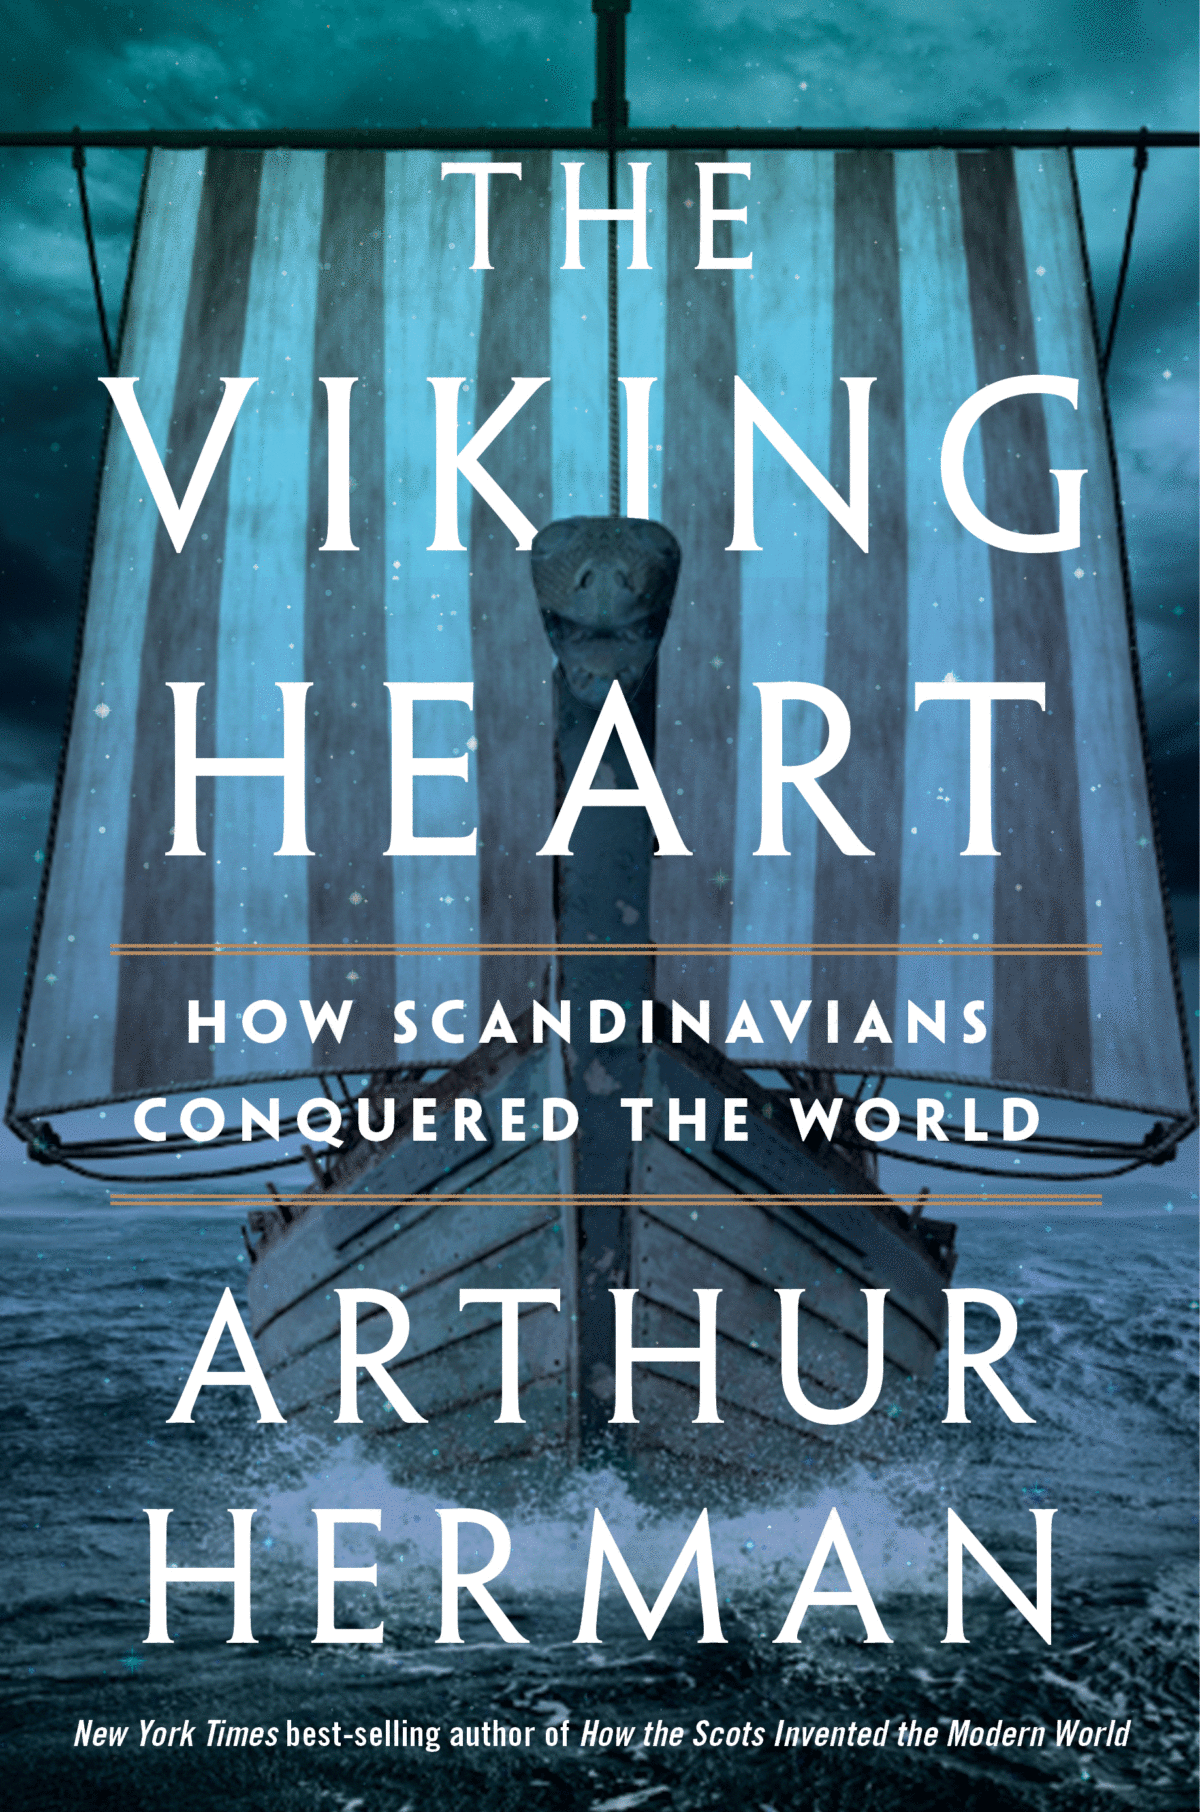 “The Viking Heart: How Scandinavians Conquered the World” by Arthur Herman. (Mariner Books, 2021)